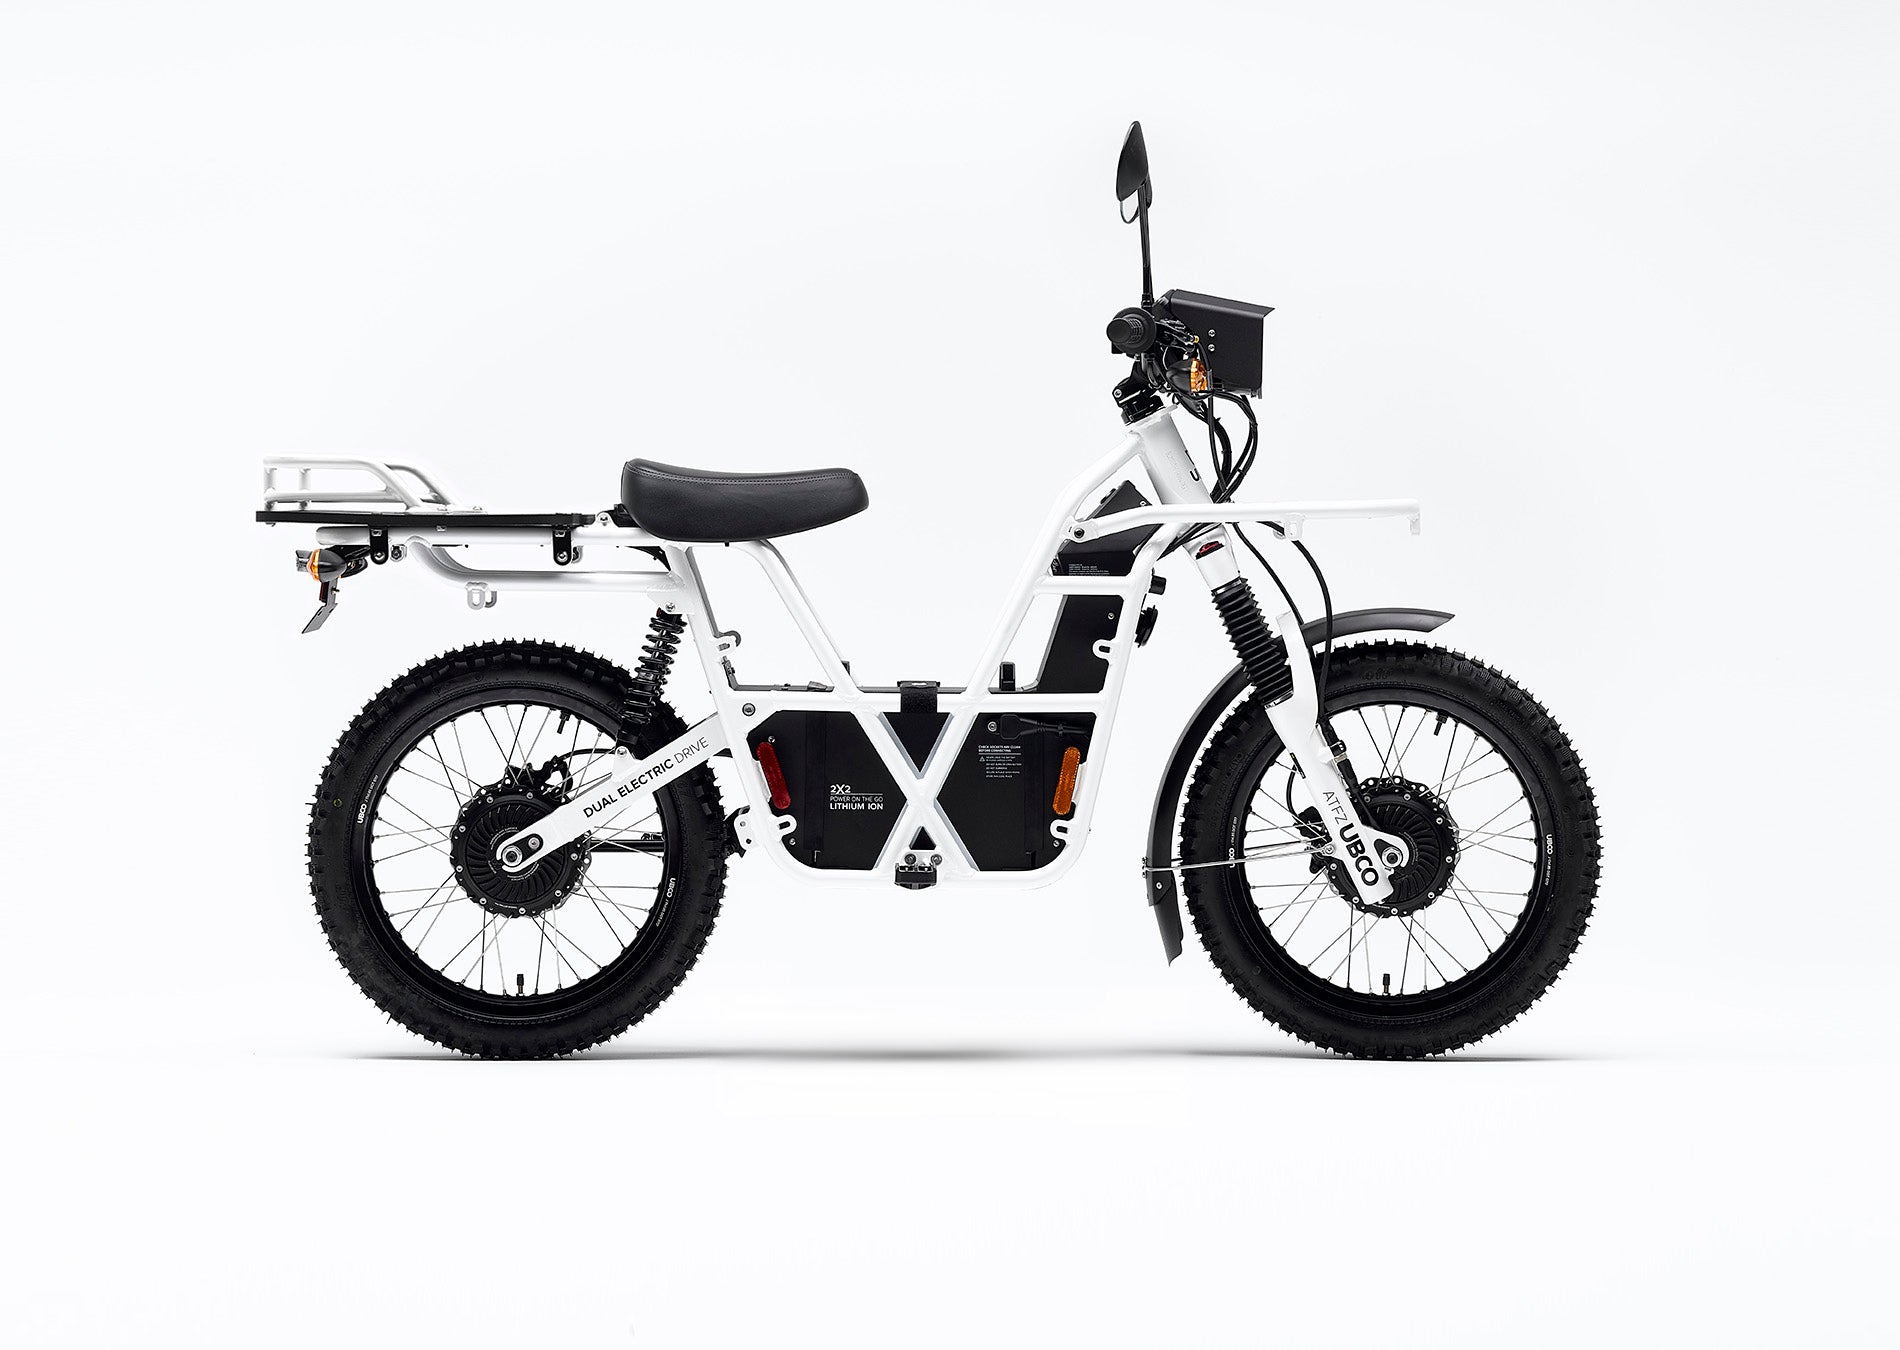 Side profile view of 2018 Ubco 2x2 electric adventure bike with accessory rear cargo deck installed